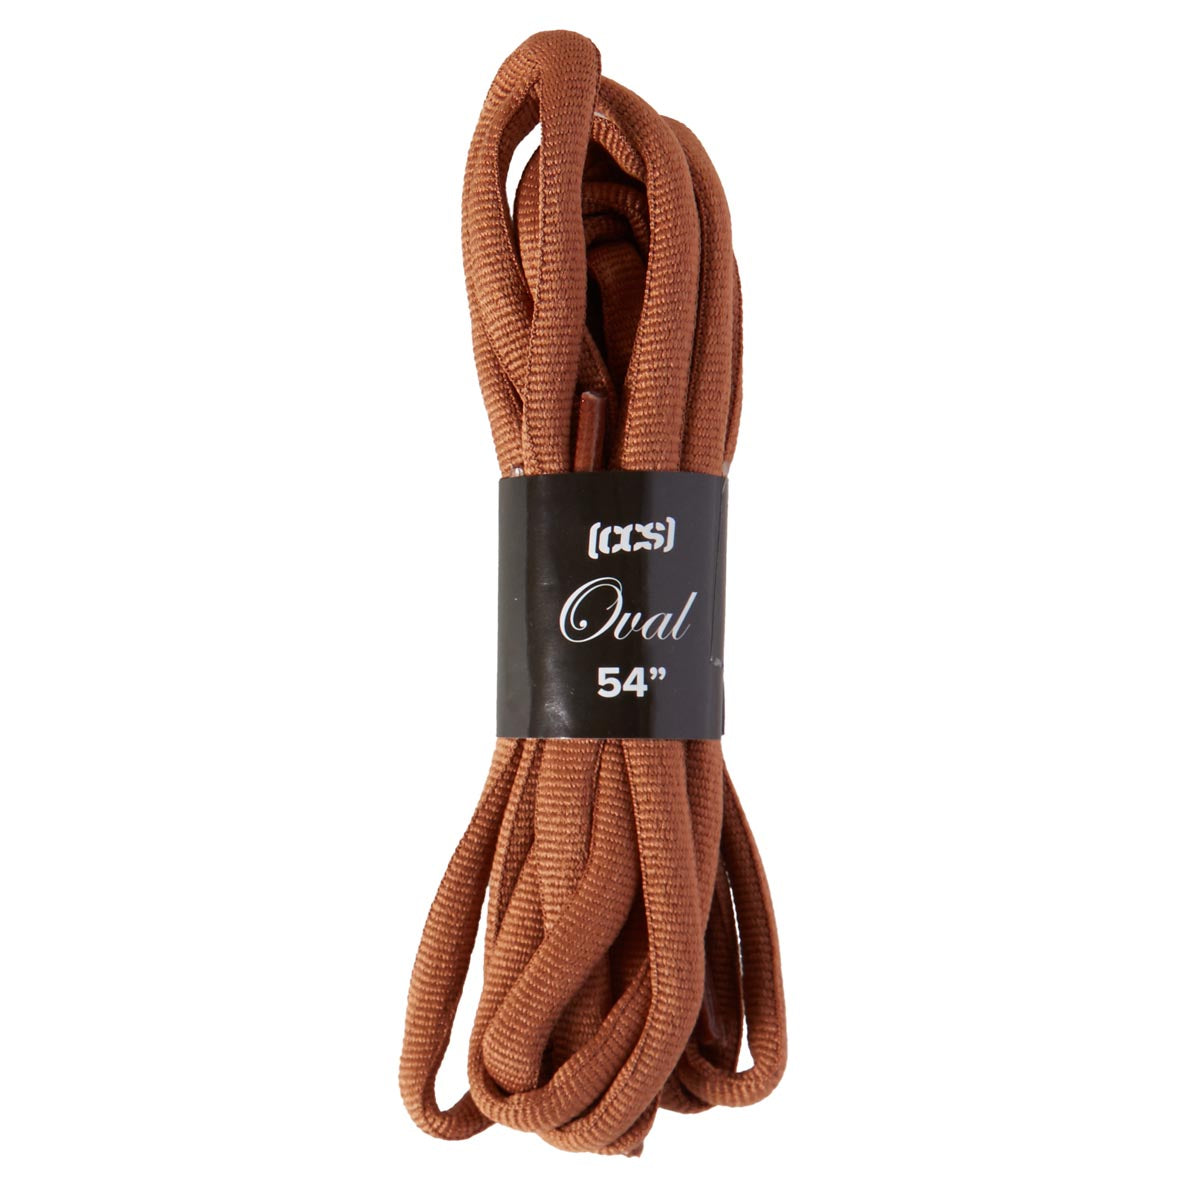 CCS Oval Shoelaces - Brown image 1